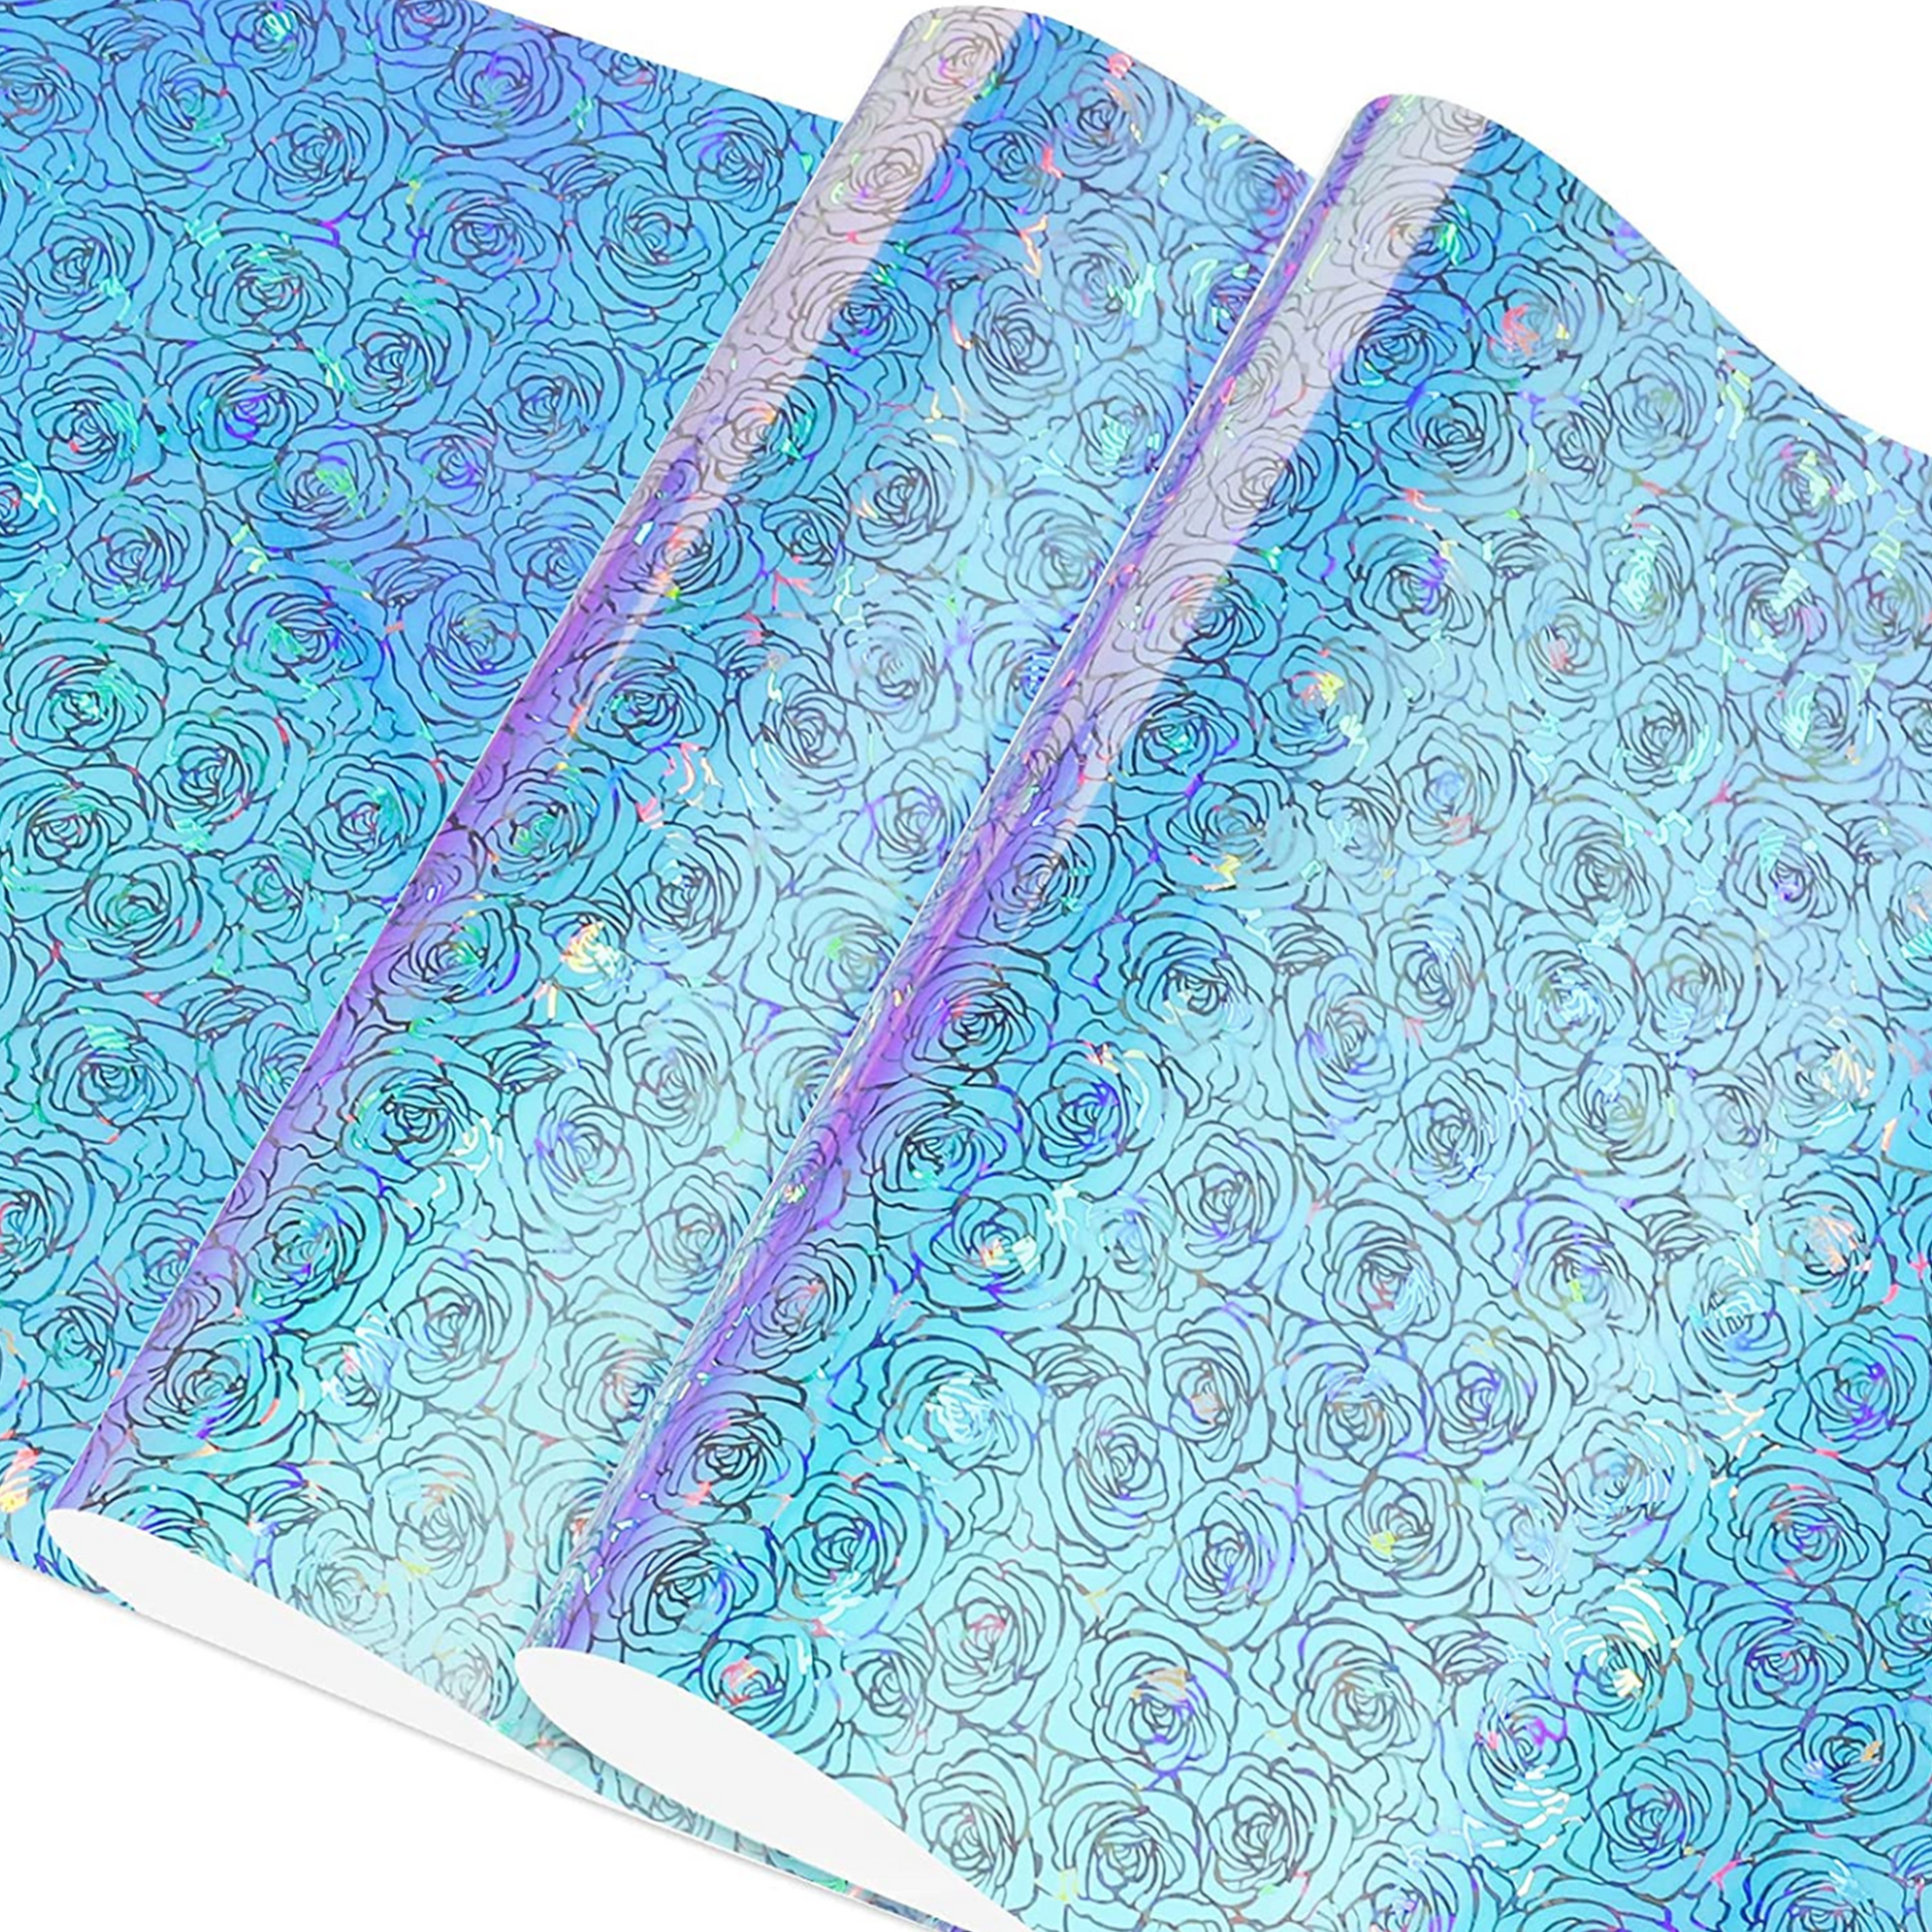 Flower or Floral Opal Holographic permanent Vinyl Semi Clear Opal - Durable and Versatile Vinyl for Crafting and DIY Projects.